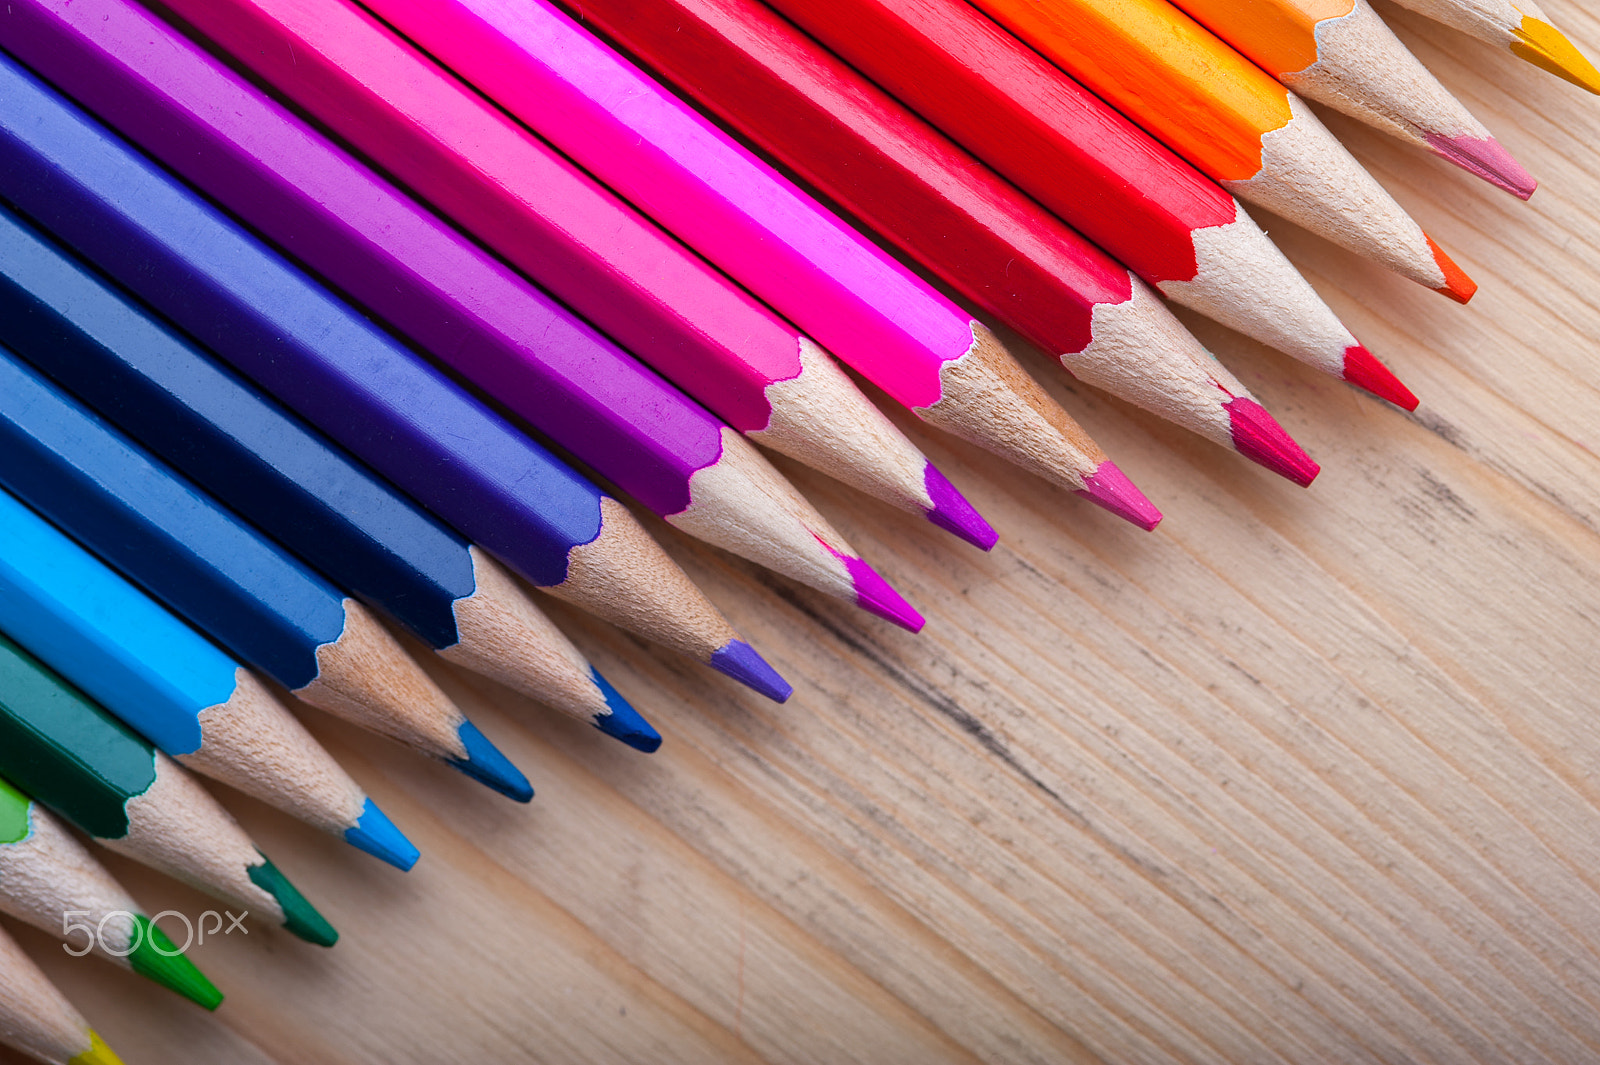 Nikon D700 sample photo. Multicolored pencils on wooden table, top view. photography